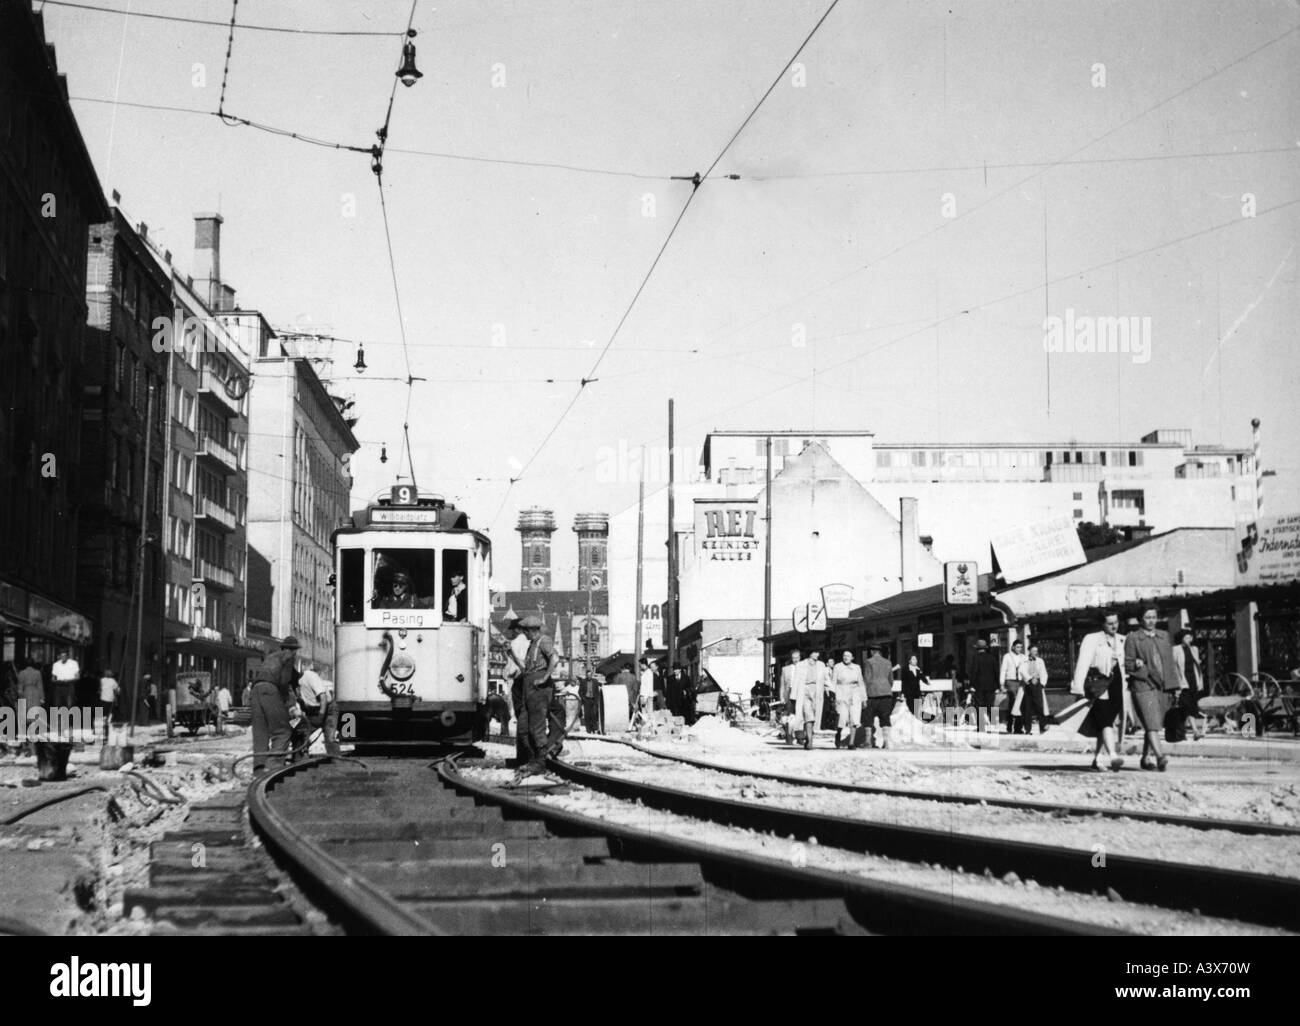 events, post-war period, destroyed cities, Munich, Bayer Street, circa 1947, streetcar, construction, reconstruction, Bavaria, Europe, American zone of occupation, Germany, 20th century, historic, historical, postwar, post war, Bayerstrasse, tram line 9, people, 1940s, Stock Photo